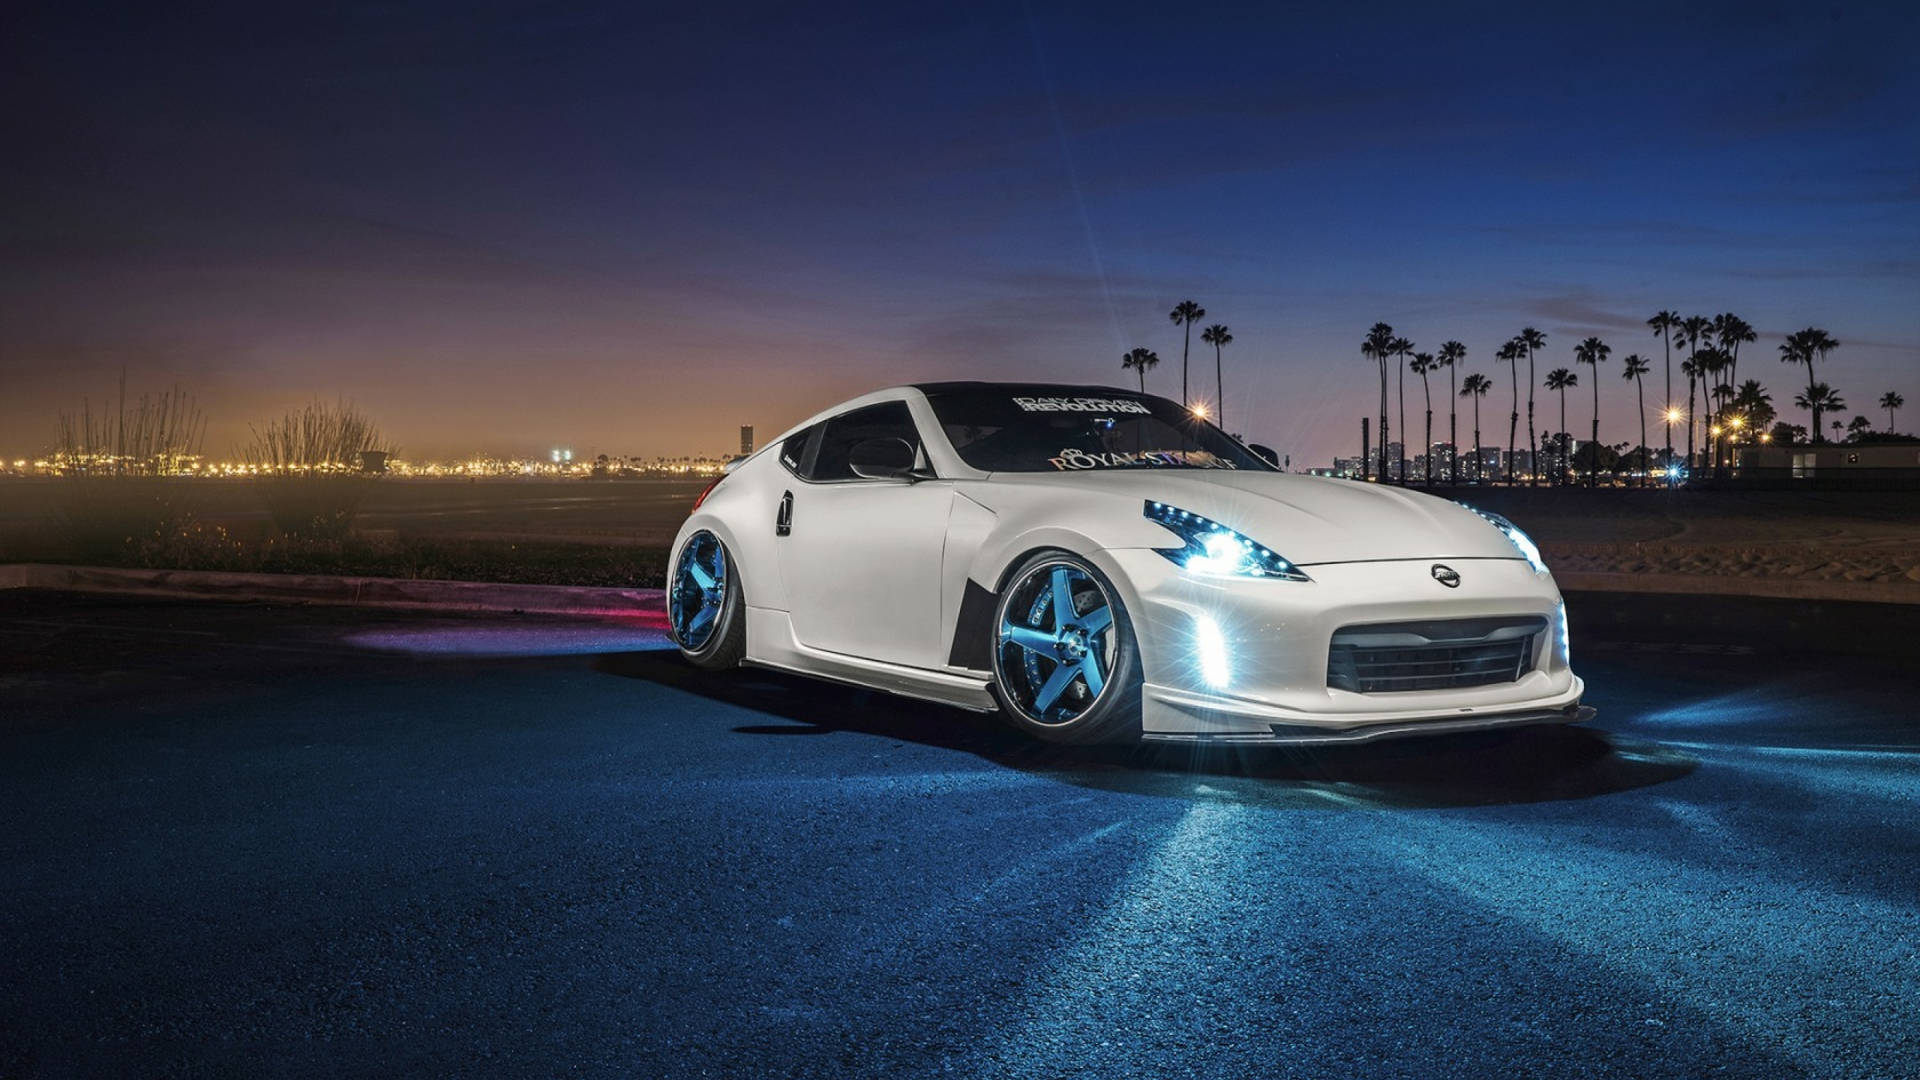 Enjoy the Premium Sporty Feel with the Nissan 370Z Wallpaper